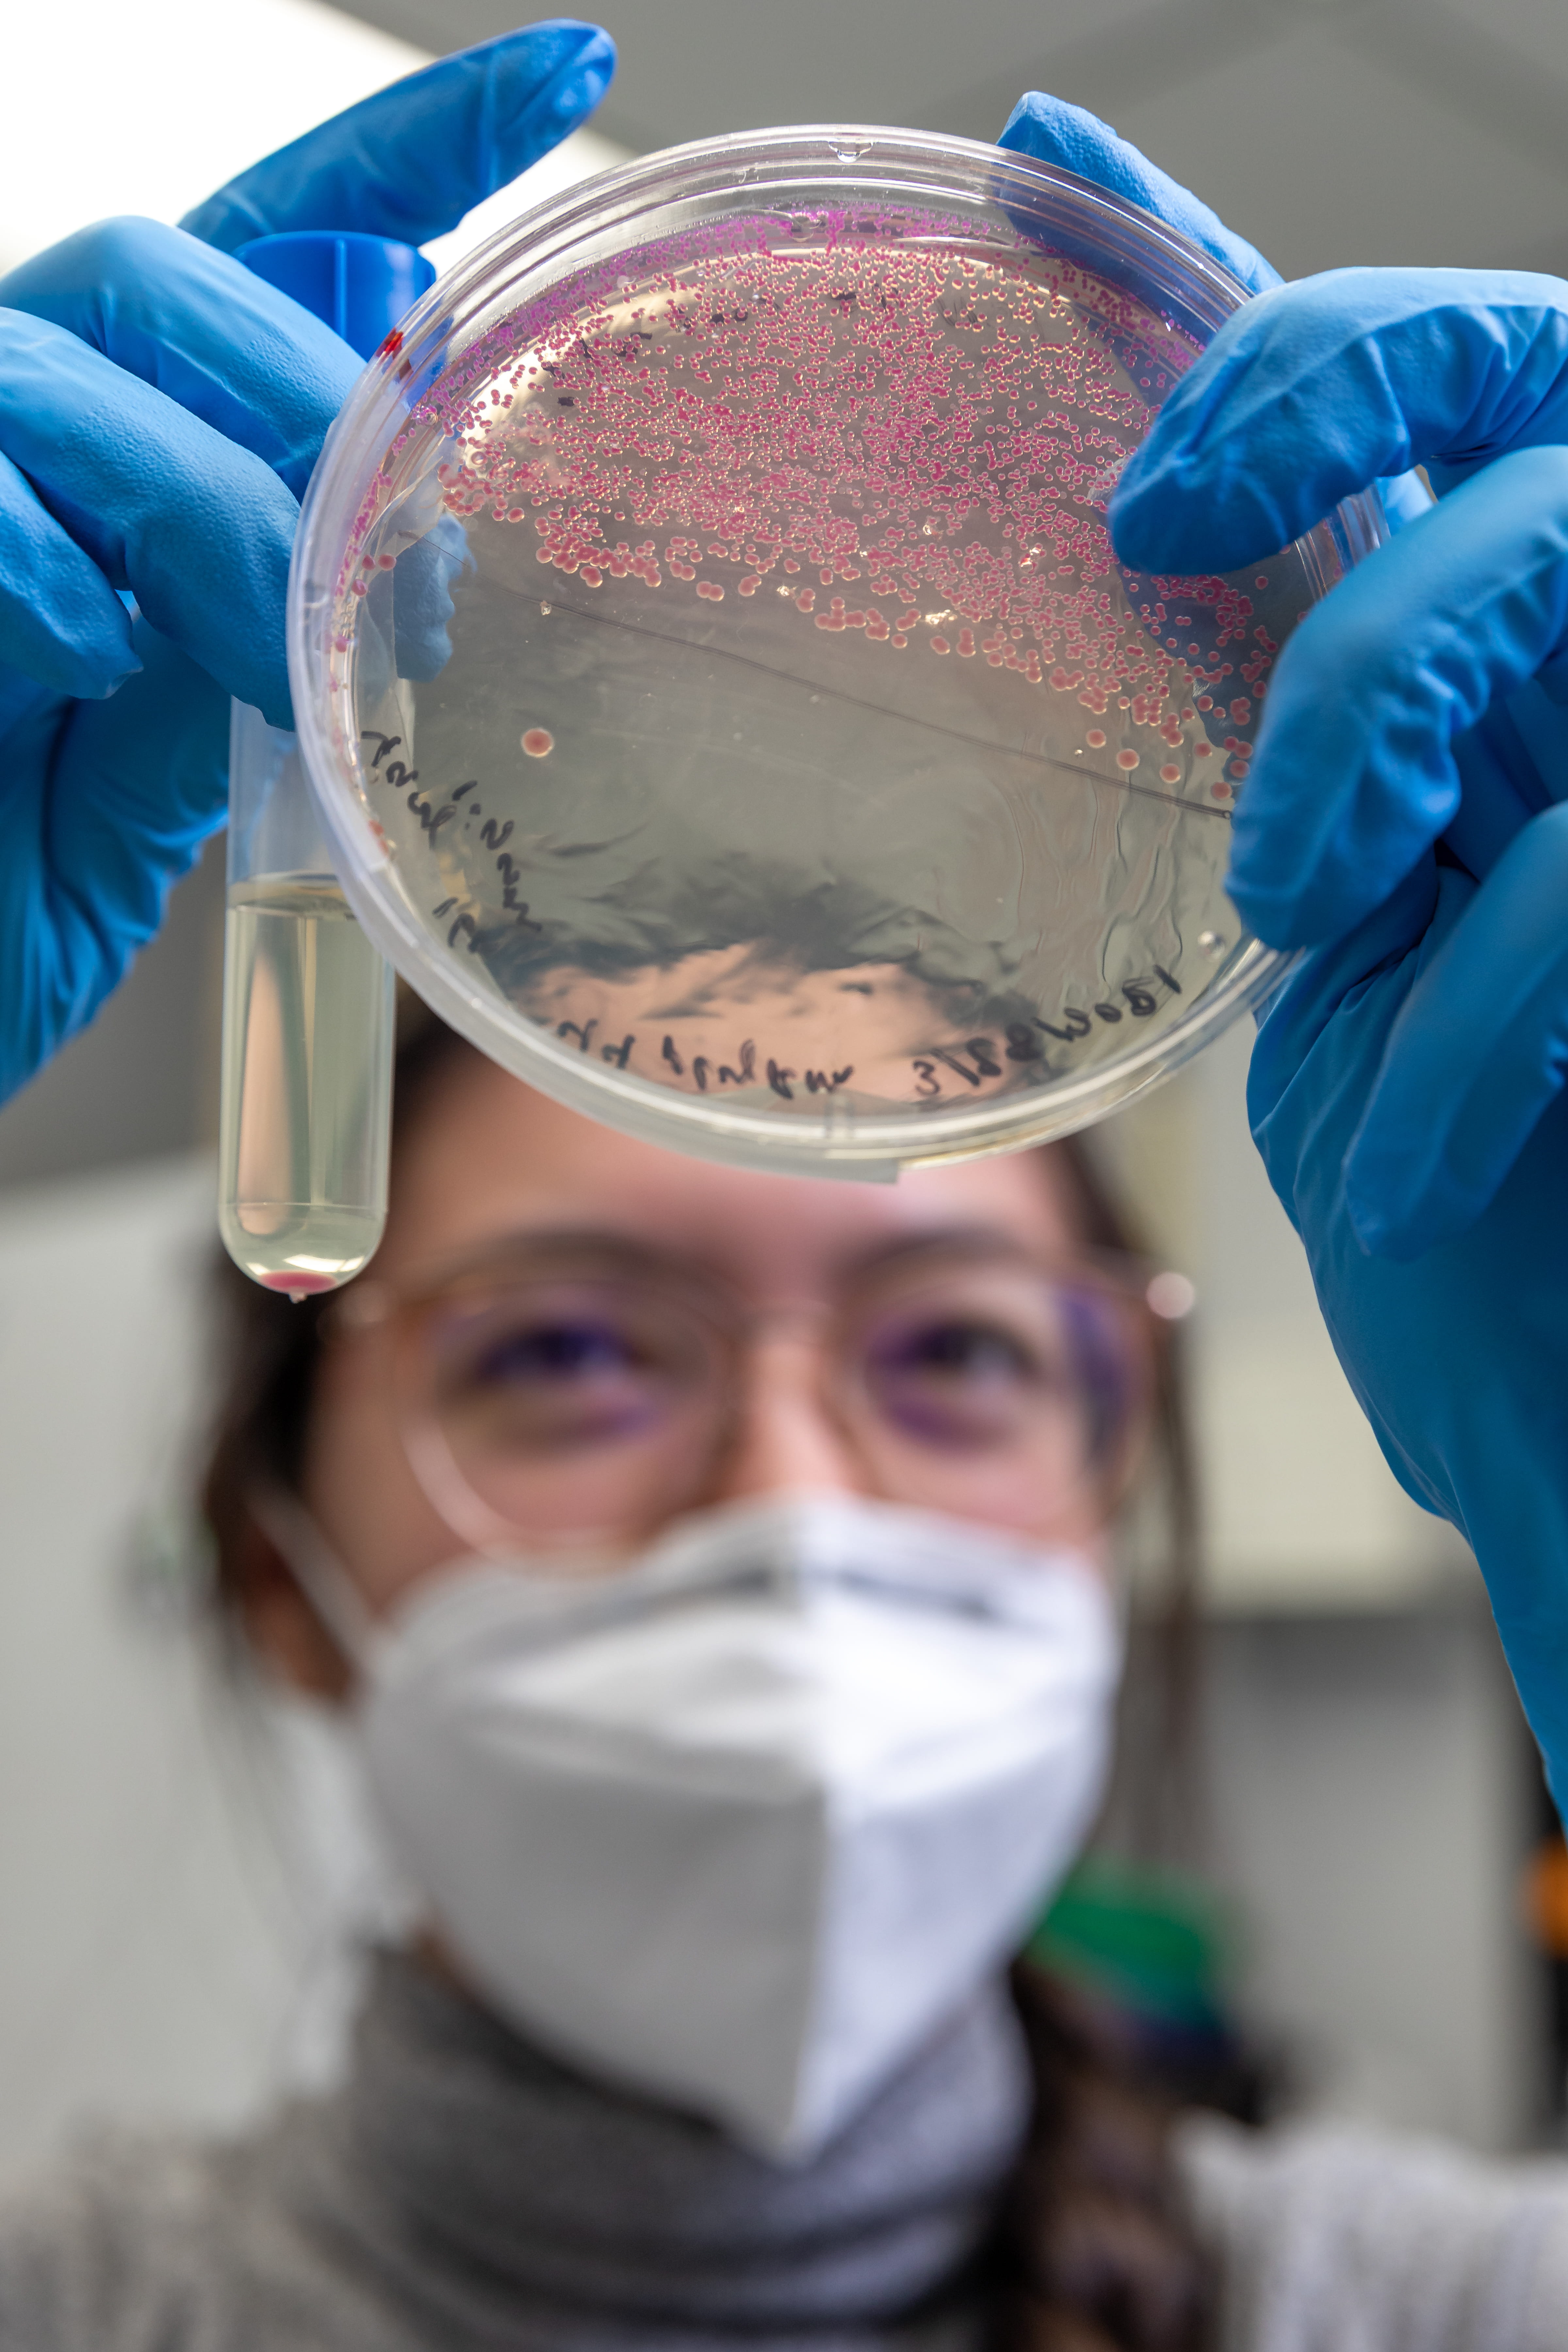 Mary Jia searches for bacteria colonies that contain the plasmid needed to construct the gene-editing tool she’s designing.